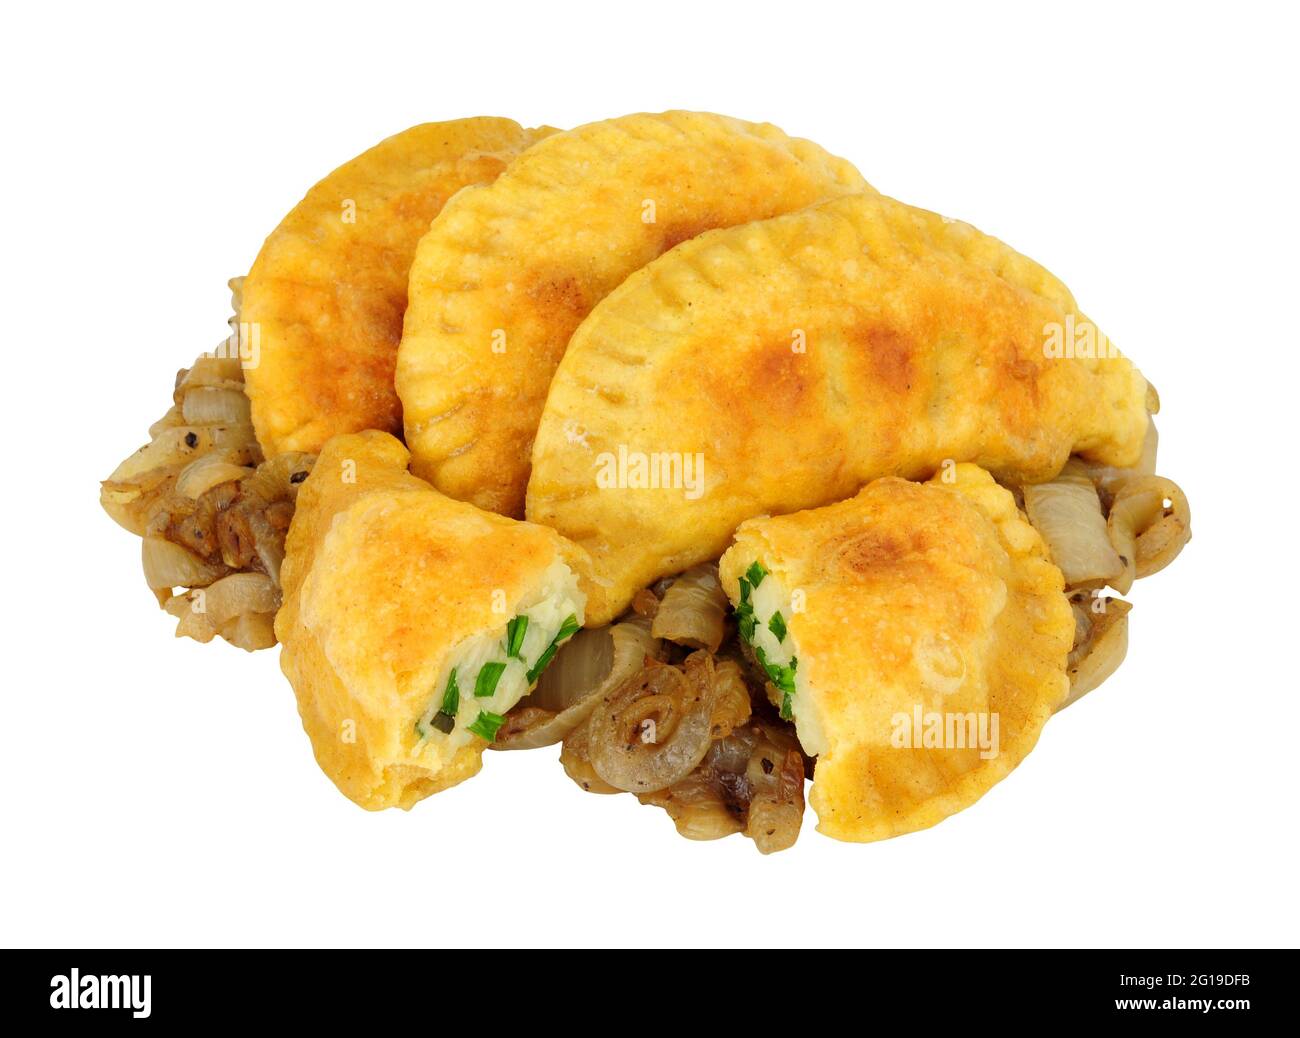 Group of potato and cheese filled Pierogi dumplings with fried onions isolated on a white background Stock Photo